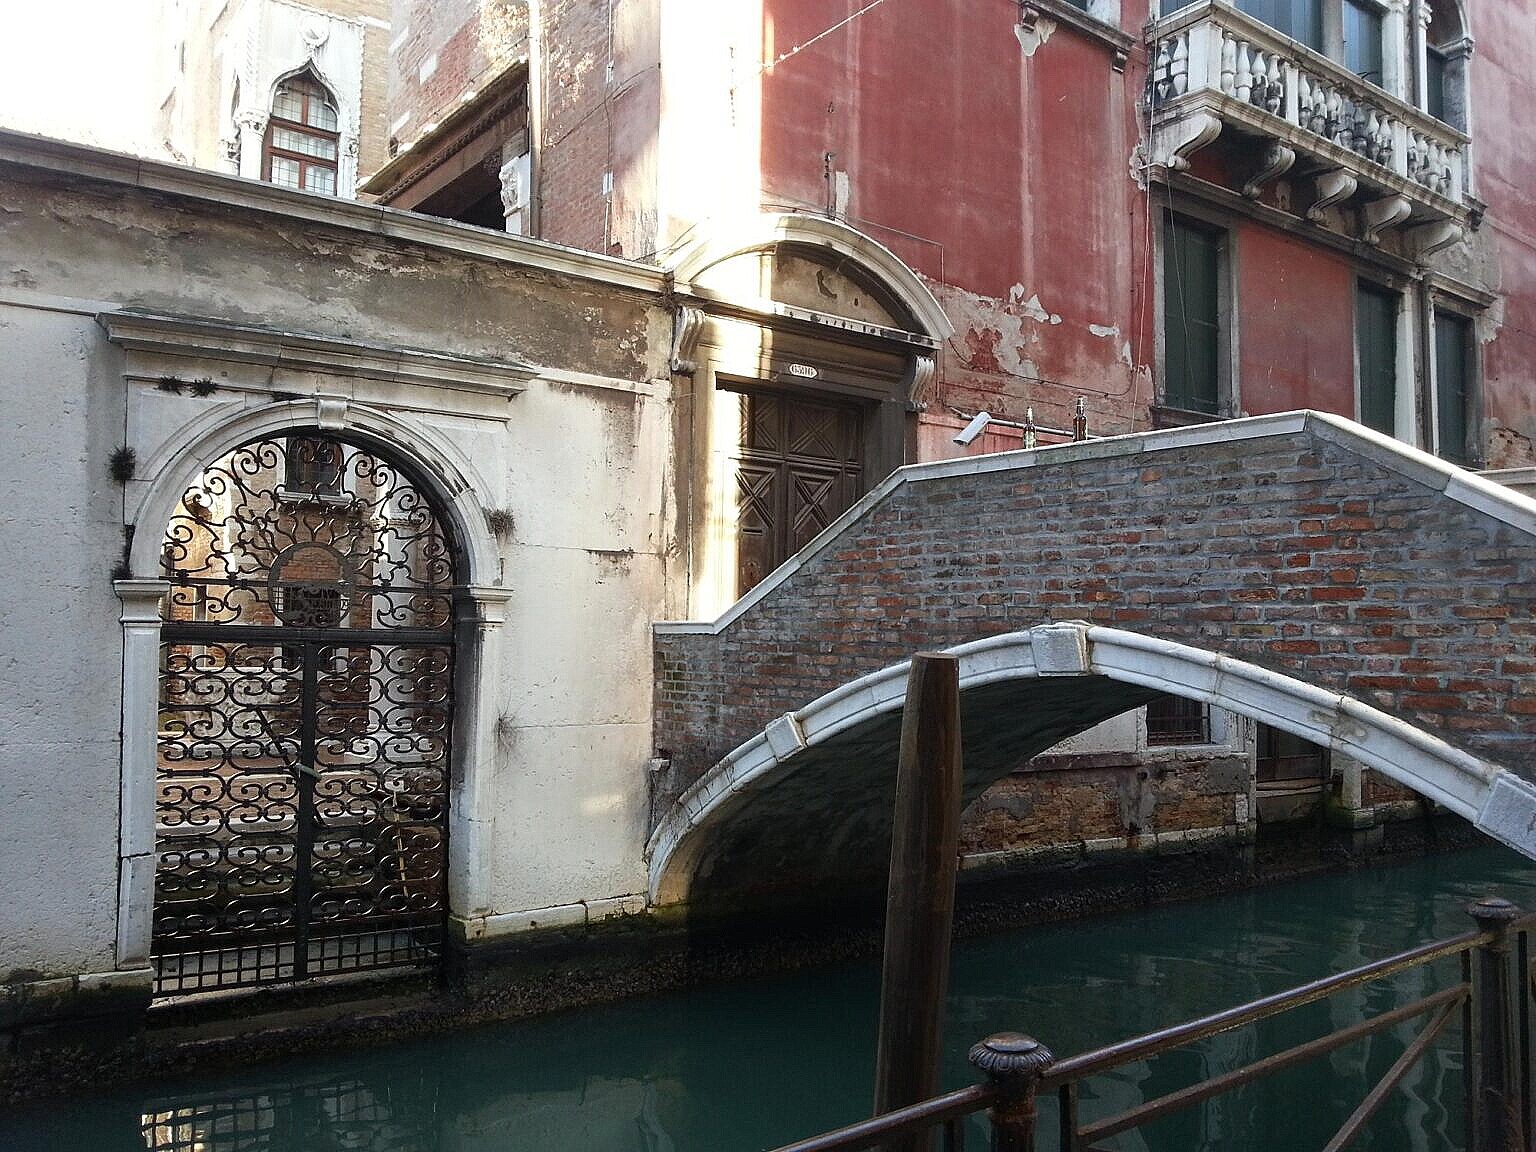 The cast iron gate and the private bridge on the canal side